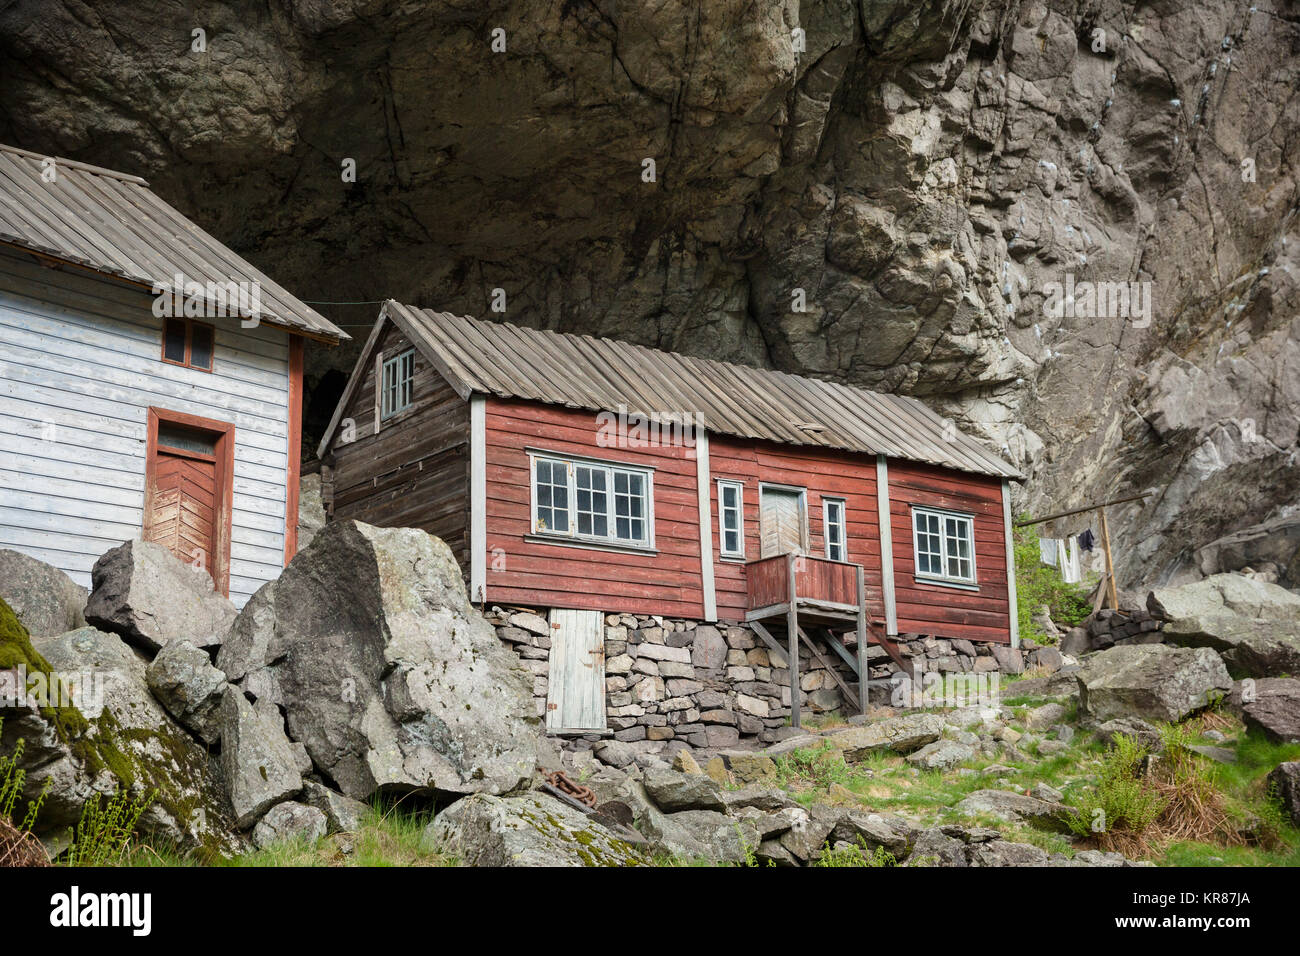 Abandoned old wooden houses dating back to the 1800s stand under a huge overhanging rock called Helleren forming a natural roof - Jossingfjord, Norway Stock Photo